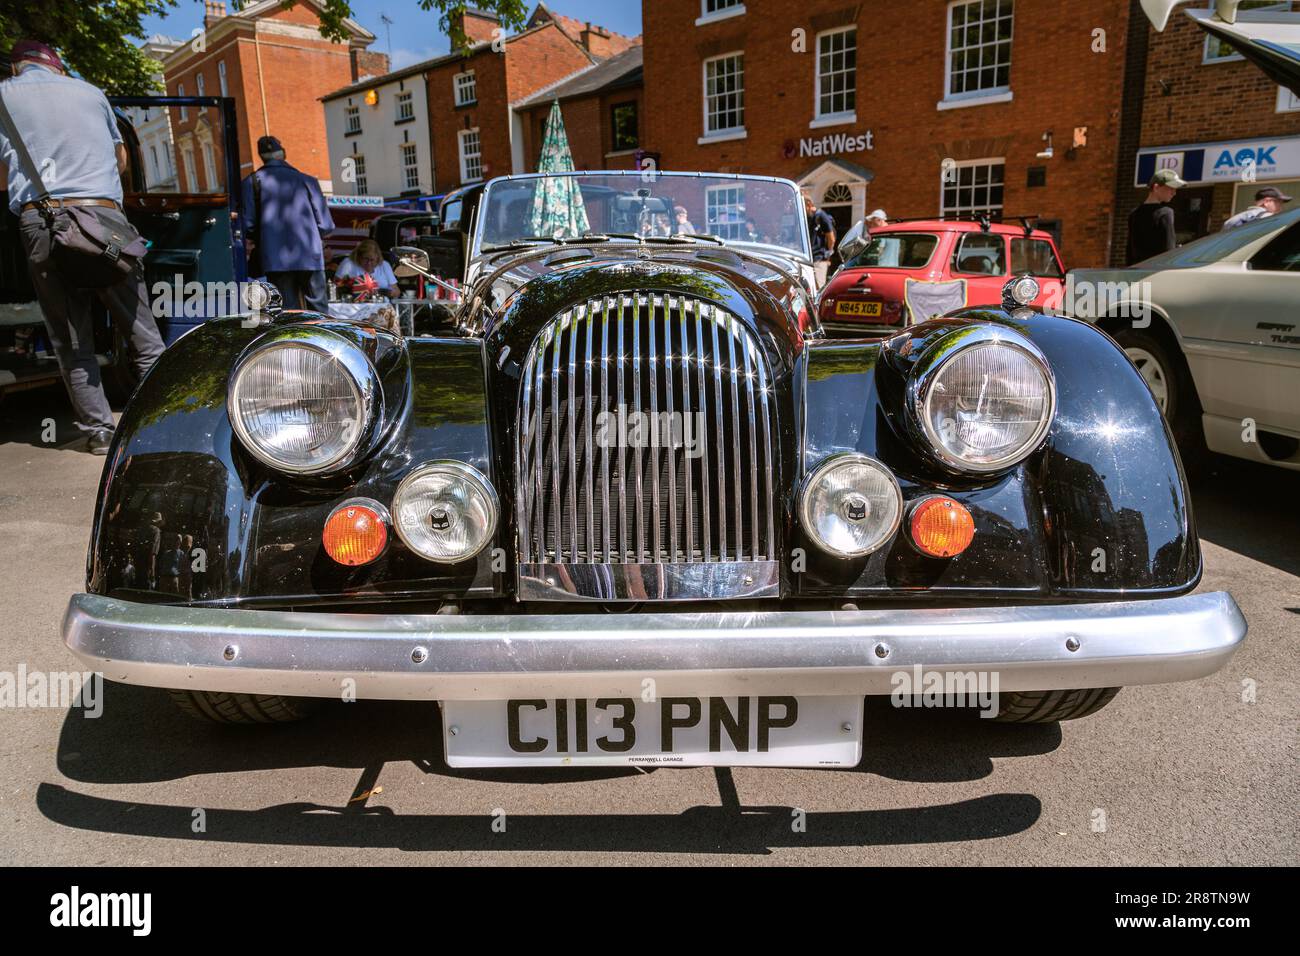 The Stylish lines of a 1980s Morgan Plus 8 offer timeless elegance and nostalgia for many British sports car enthusiasts. Stock Photo